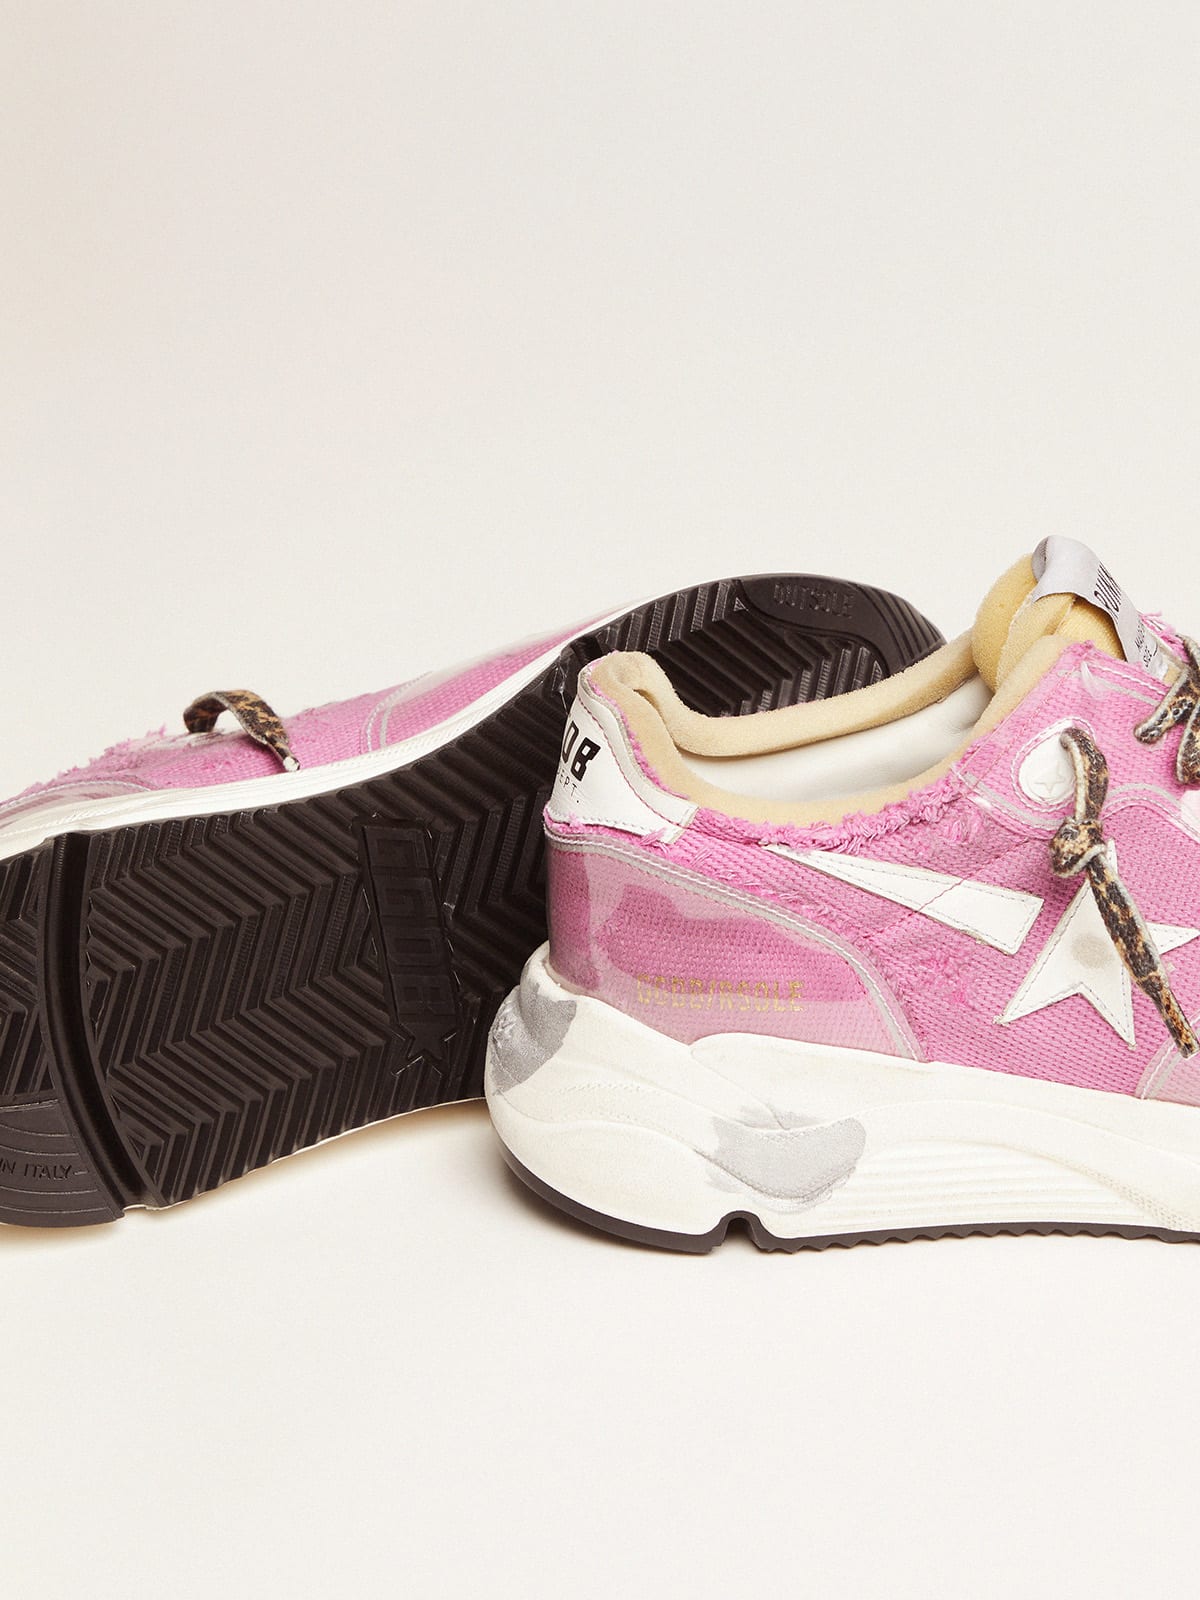 Golden Goose - Fuchsia Running Sole LTD sneakers with raw edges in 